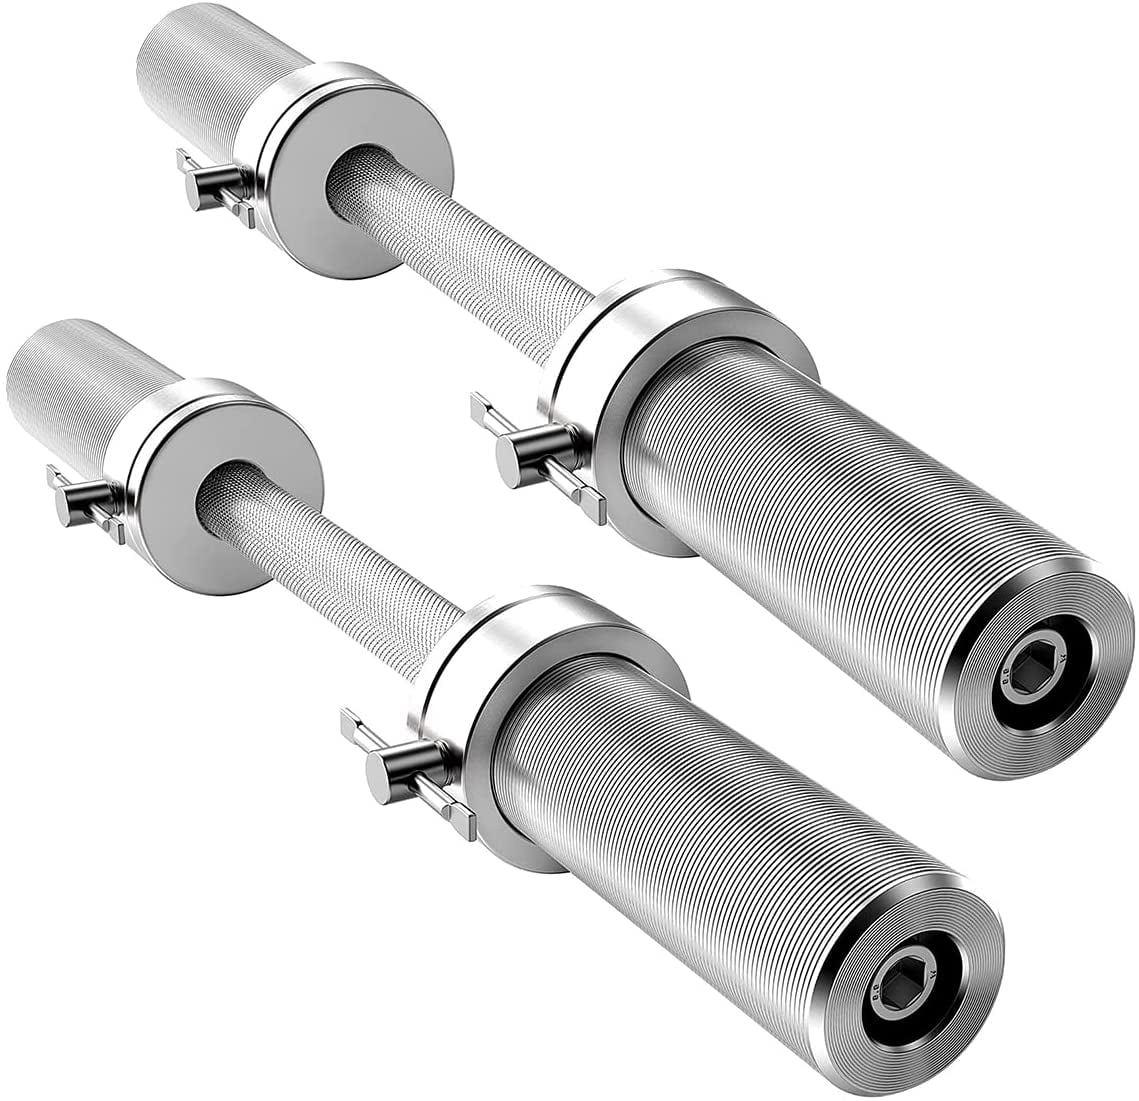 2” Olympic Dumbbell Handles–Solid Steel Dumbbell Weight Lifting Bars w/Sleeves 